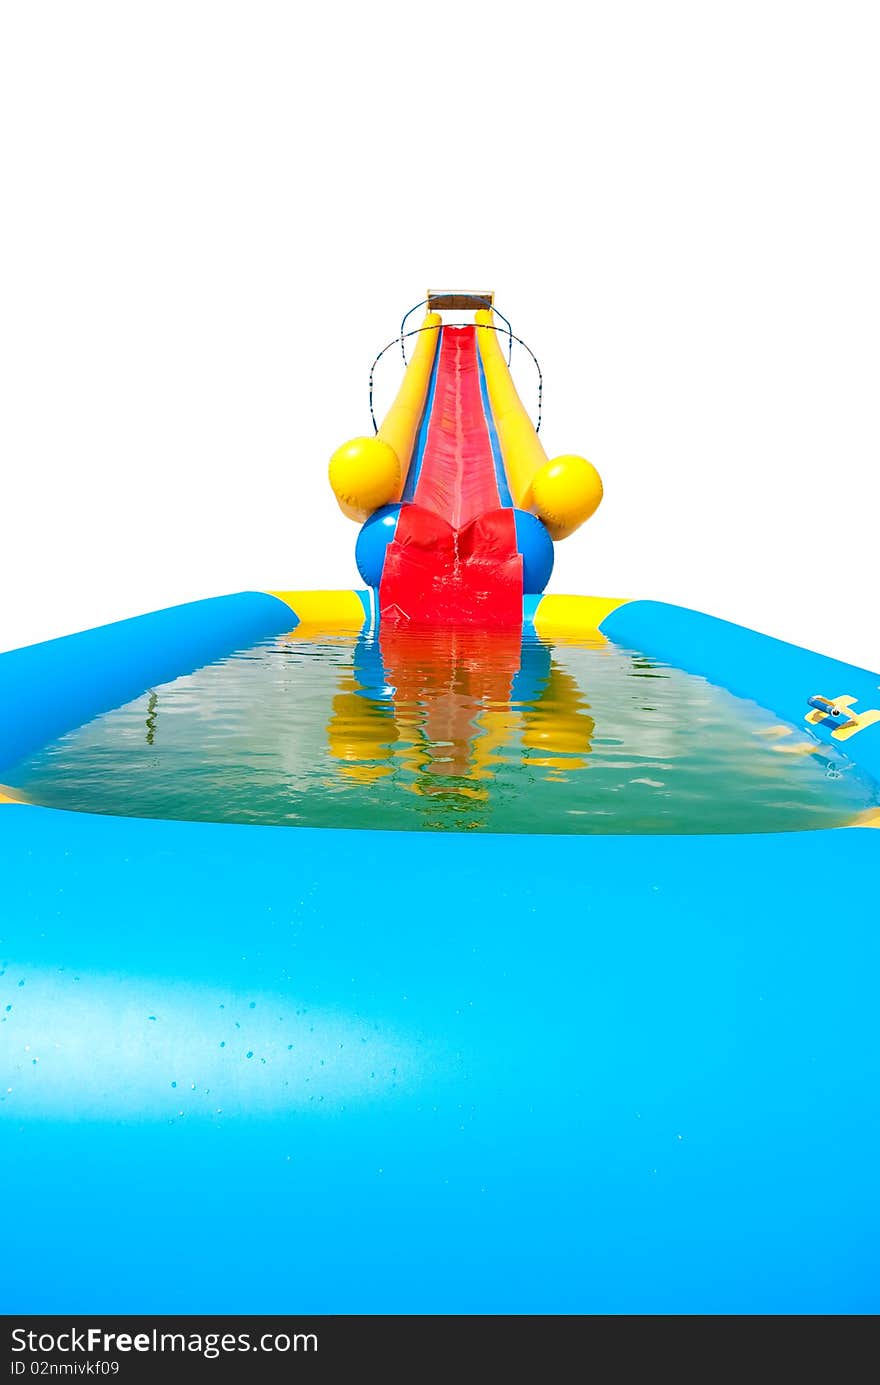 Waterslide with pool isolated on white background. Waterslide with pool isolated on white background